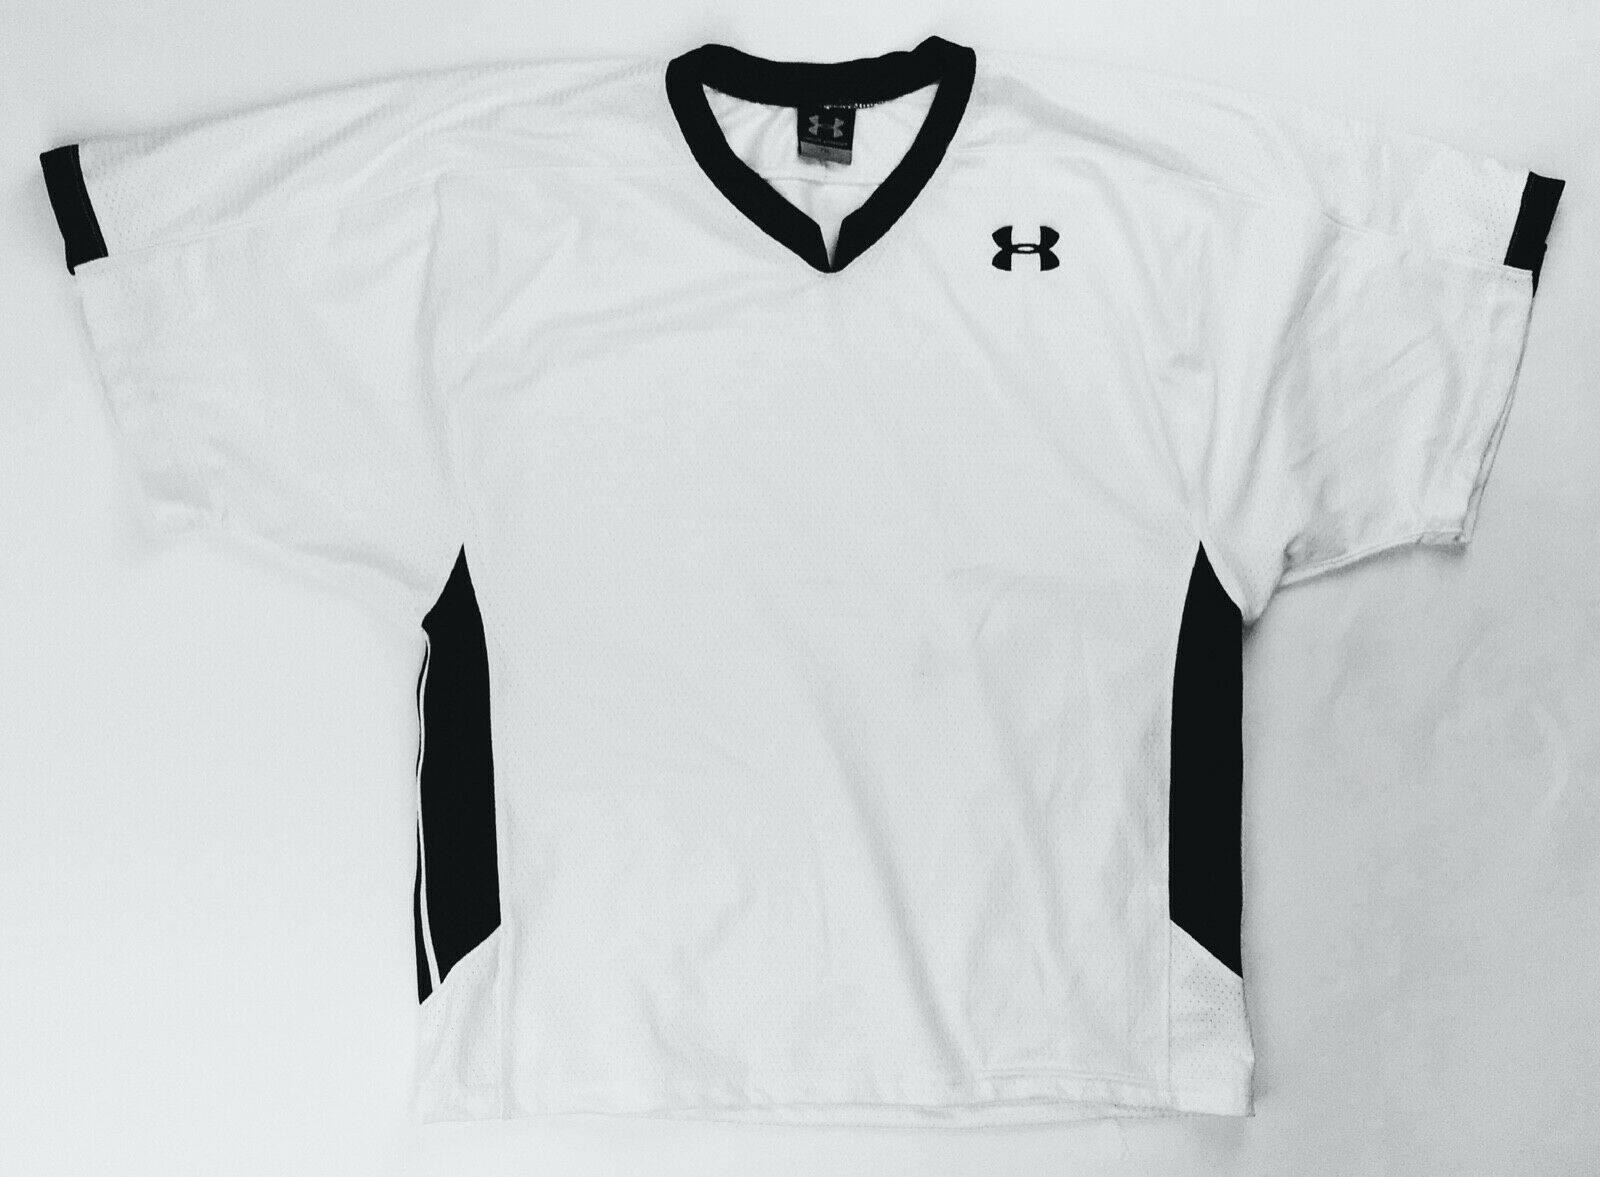 Primary image for Under Armour Performance Football V-Neck Training Jersey Youth XL White Black